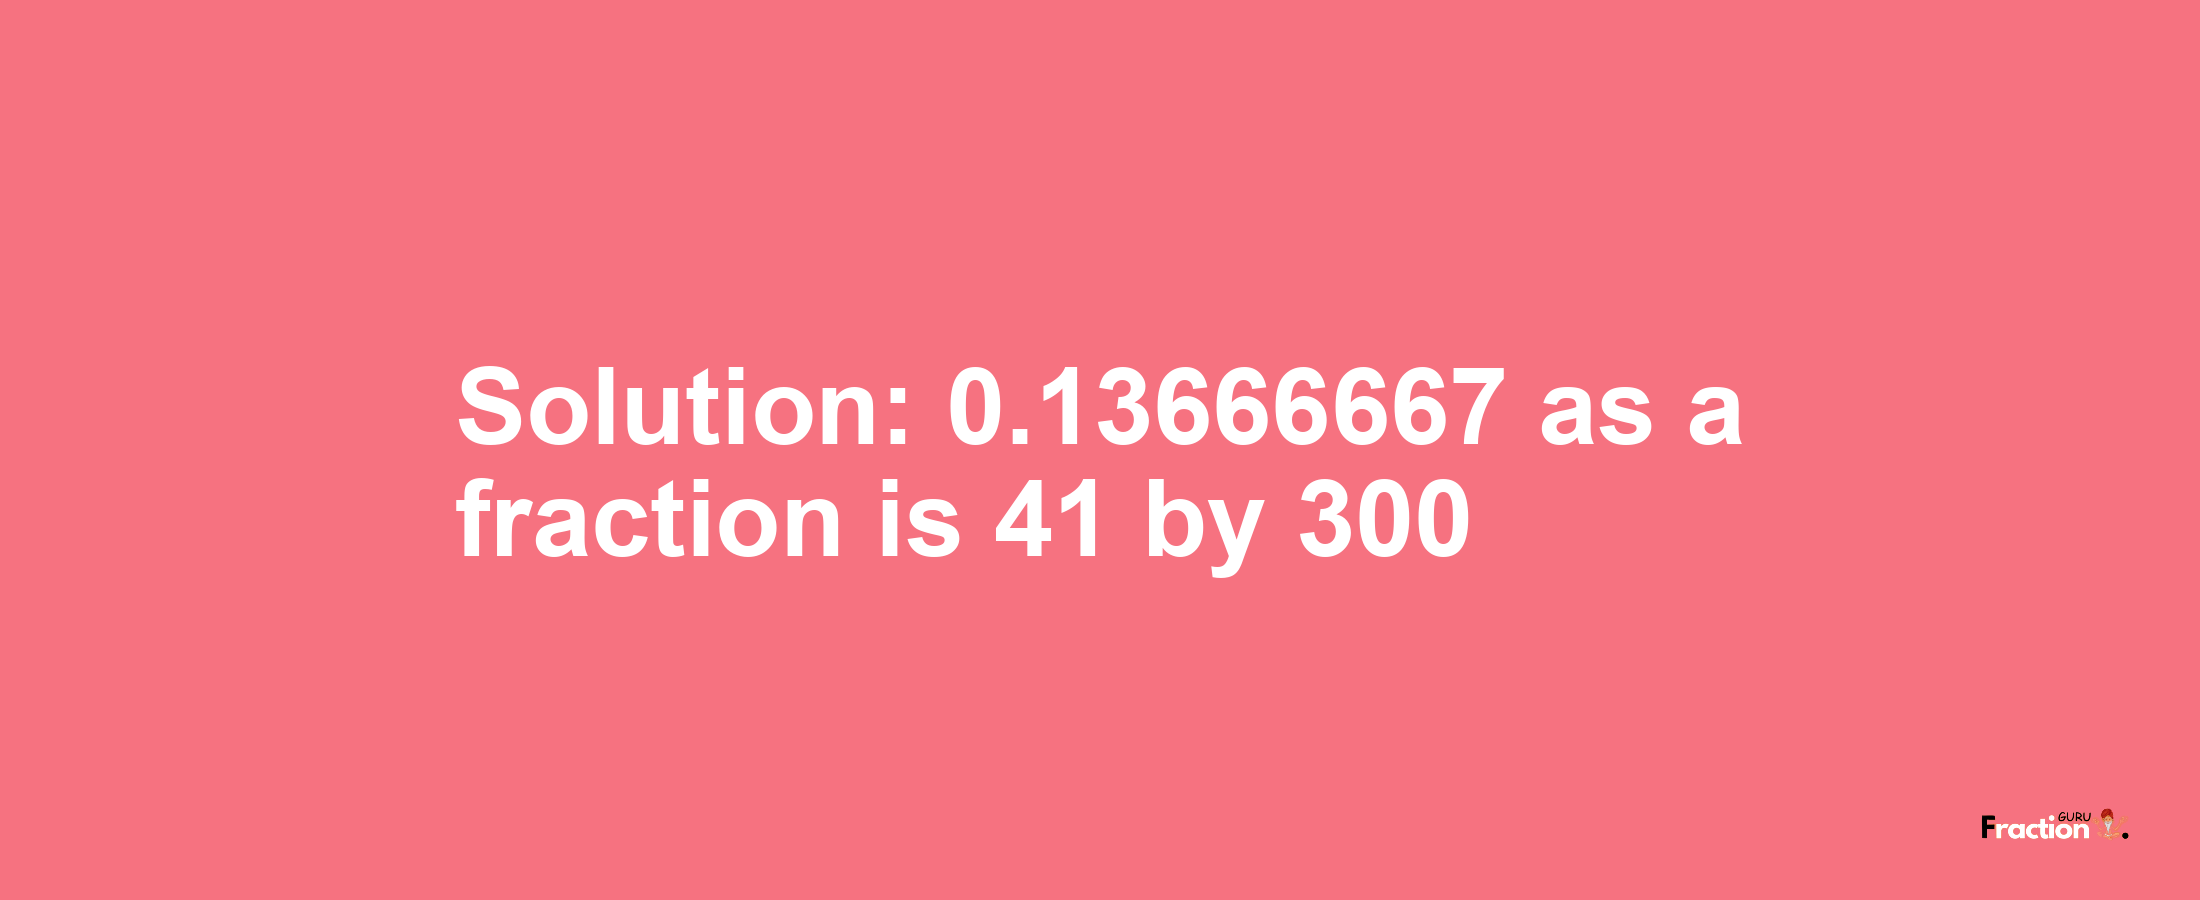 Solution:0.13666667 as a fraction is 41/300